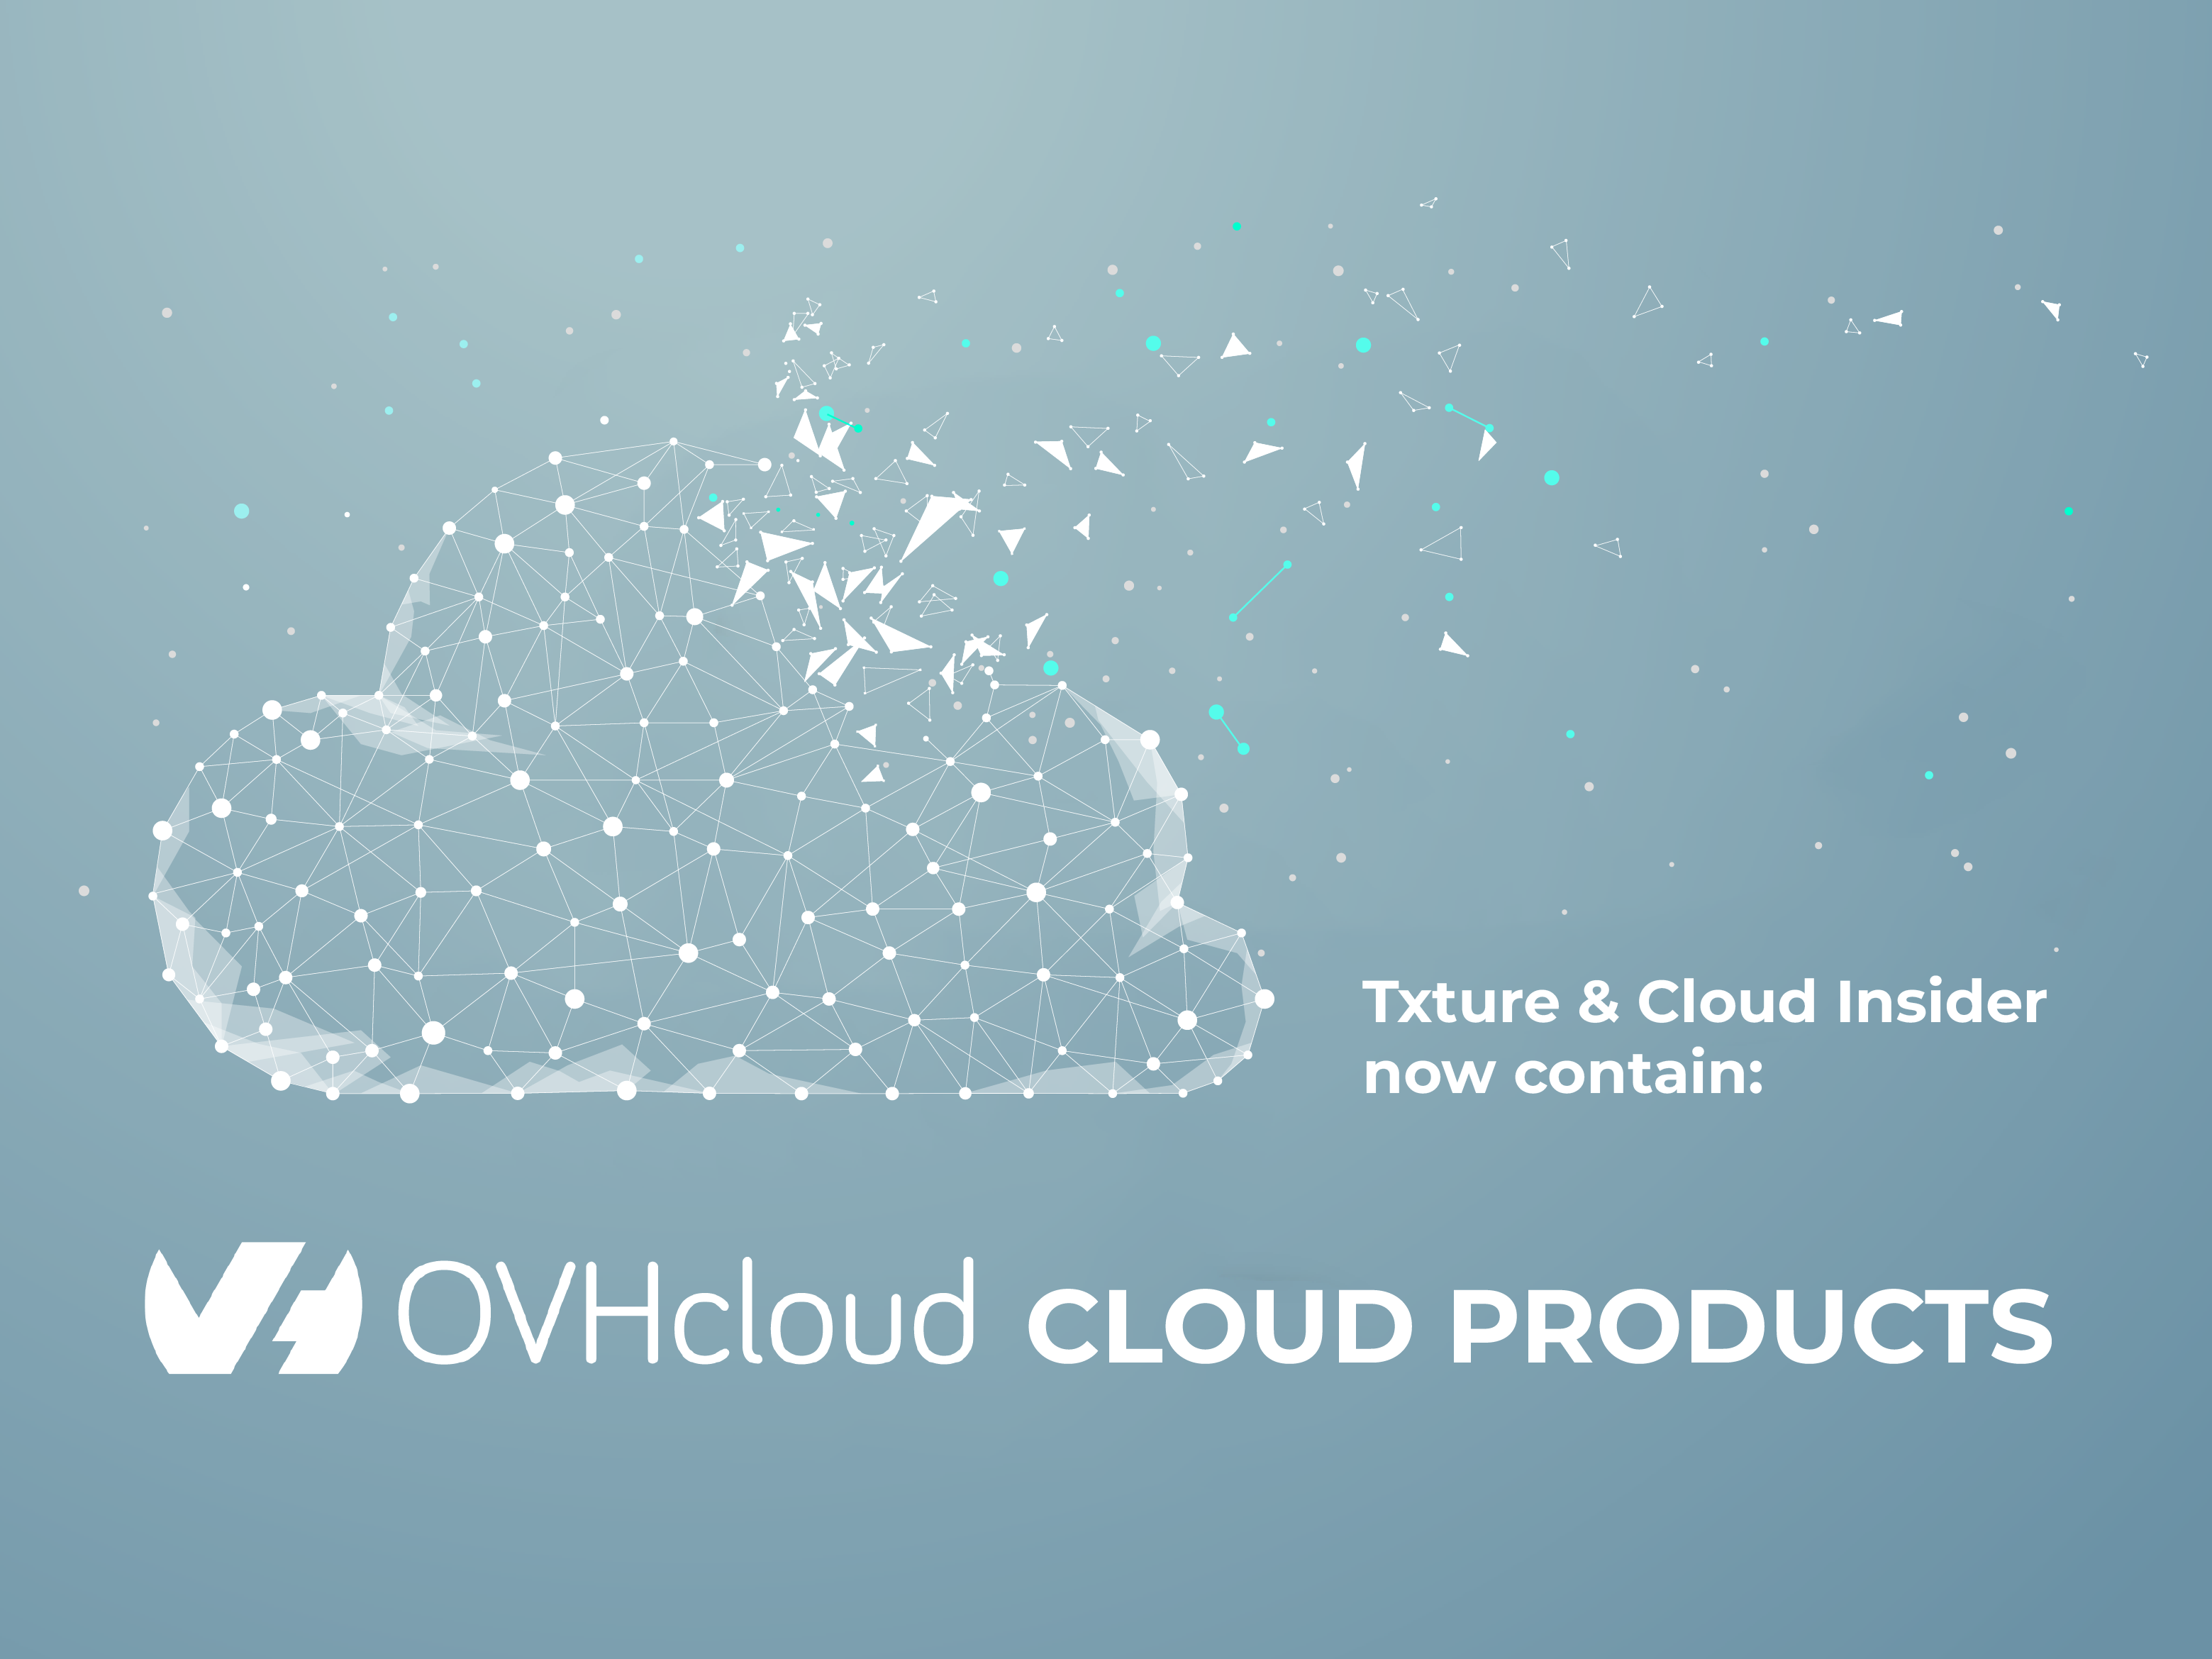 Txture and Cloud Insider now offer OVHcloud Products.